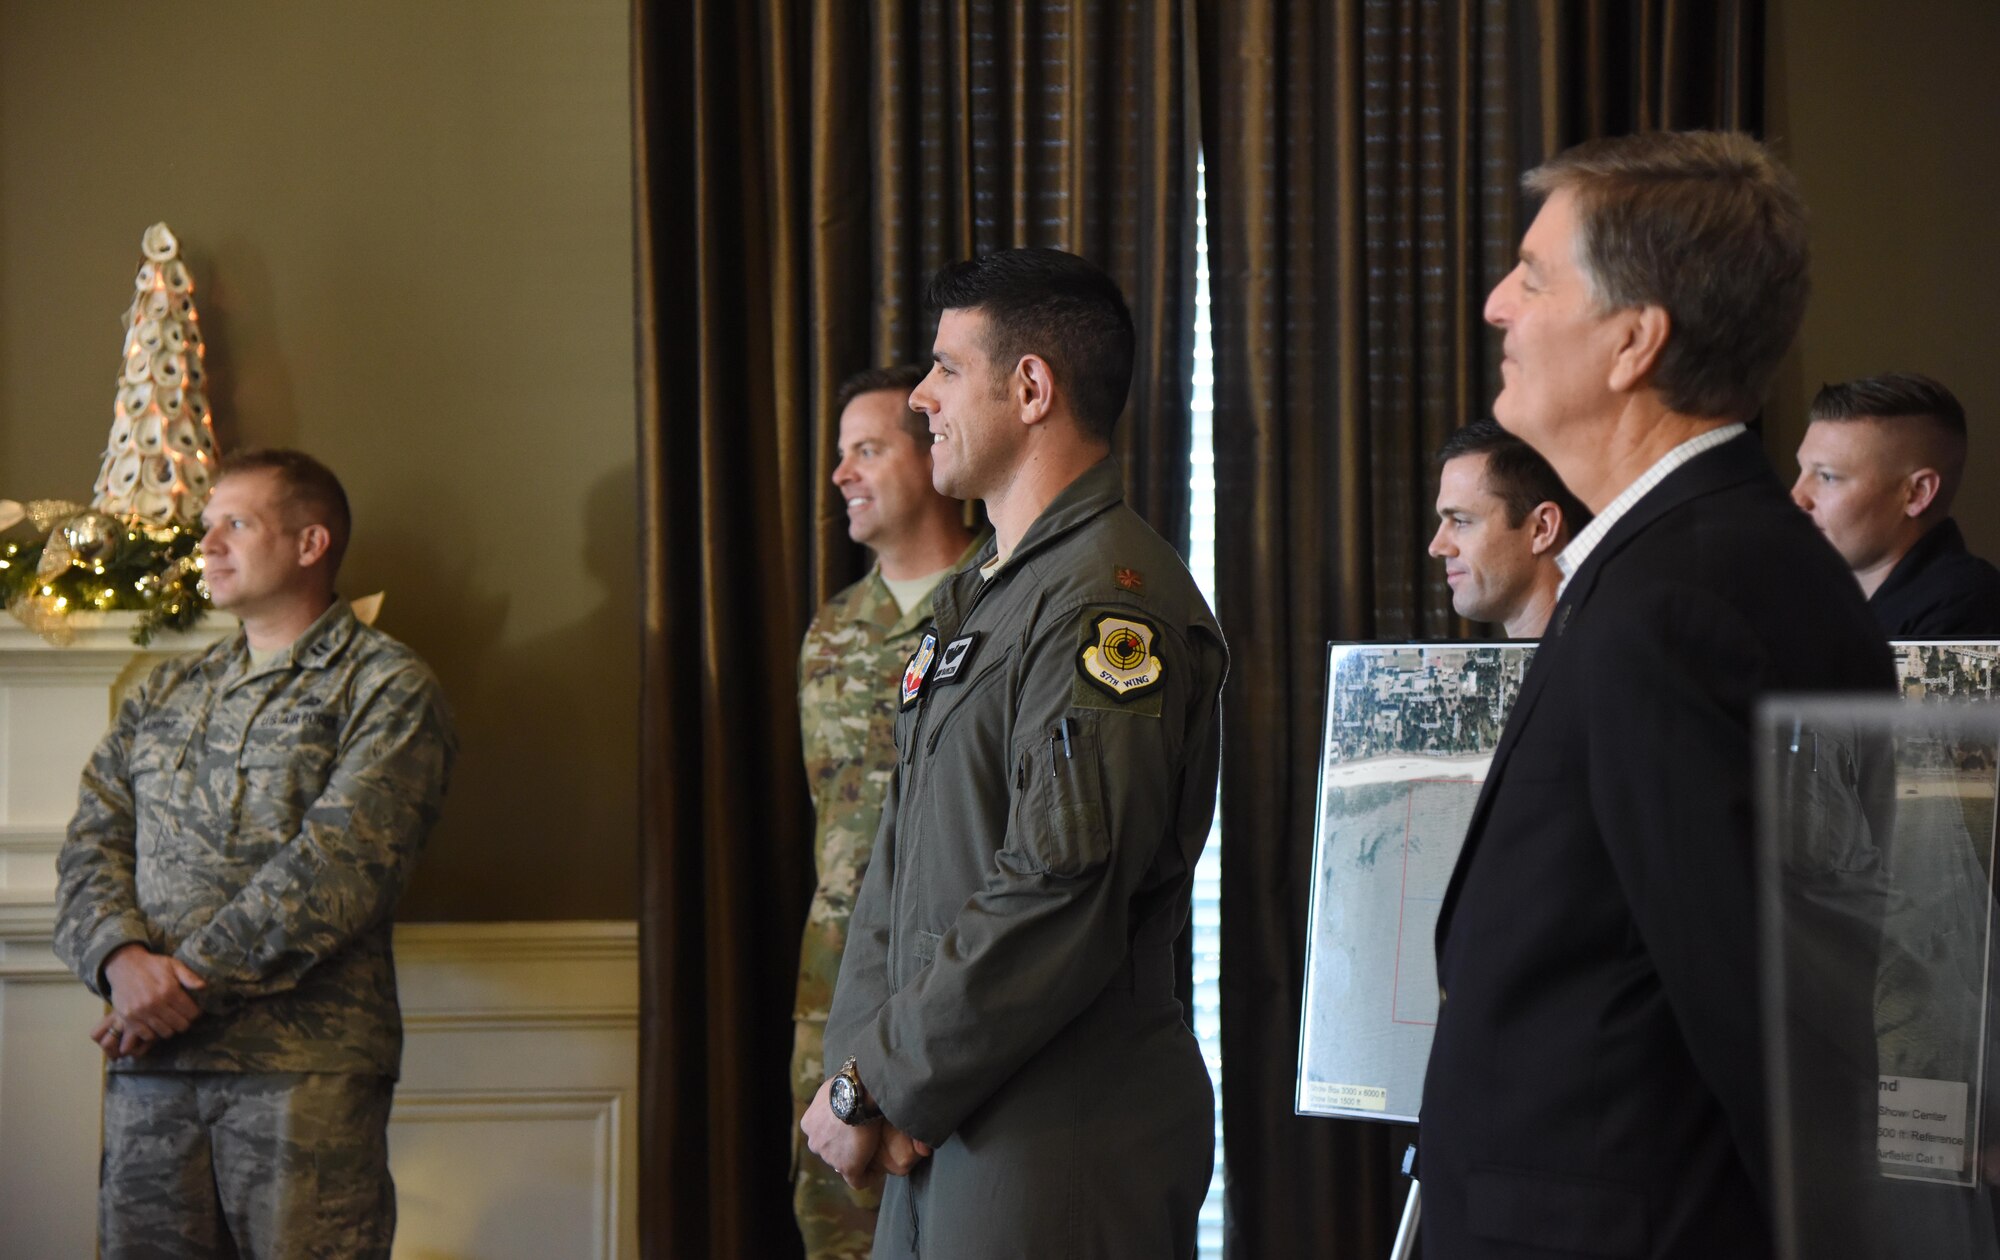 Keesler and Biloxi leadership, along with two U.S. Air Force Thunderbird pilots, attend a press conference to formally announce Thunder Over the Sound: The Keesler and Biloxi Air and Space Show at the Biloxi Visitors Center, in Biloxi, Mississippi, Dec. 18, 2018. The press conference reviewed and confirmed information and acts for the air show and allowed attendees to meet with and ask questions of all speakers. (U.S. Air Force photo by Kemberly Groue)